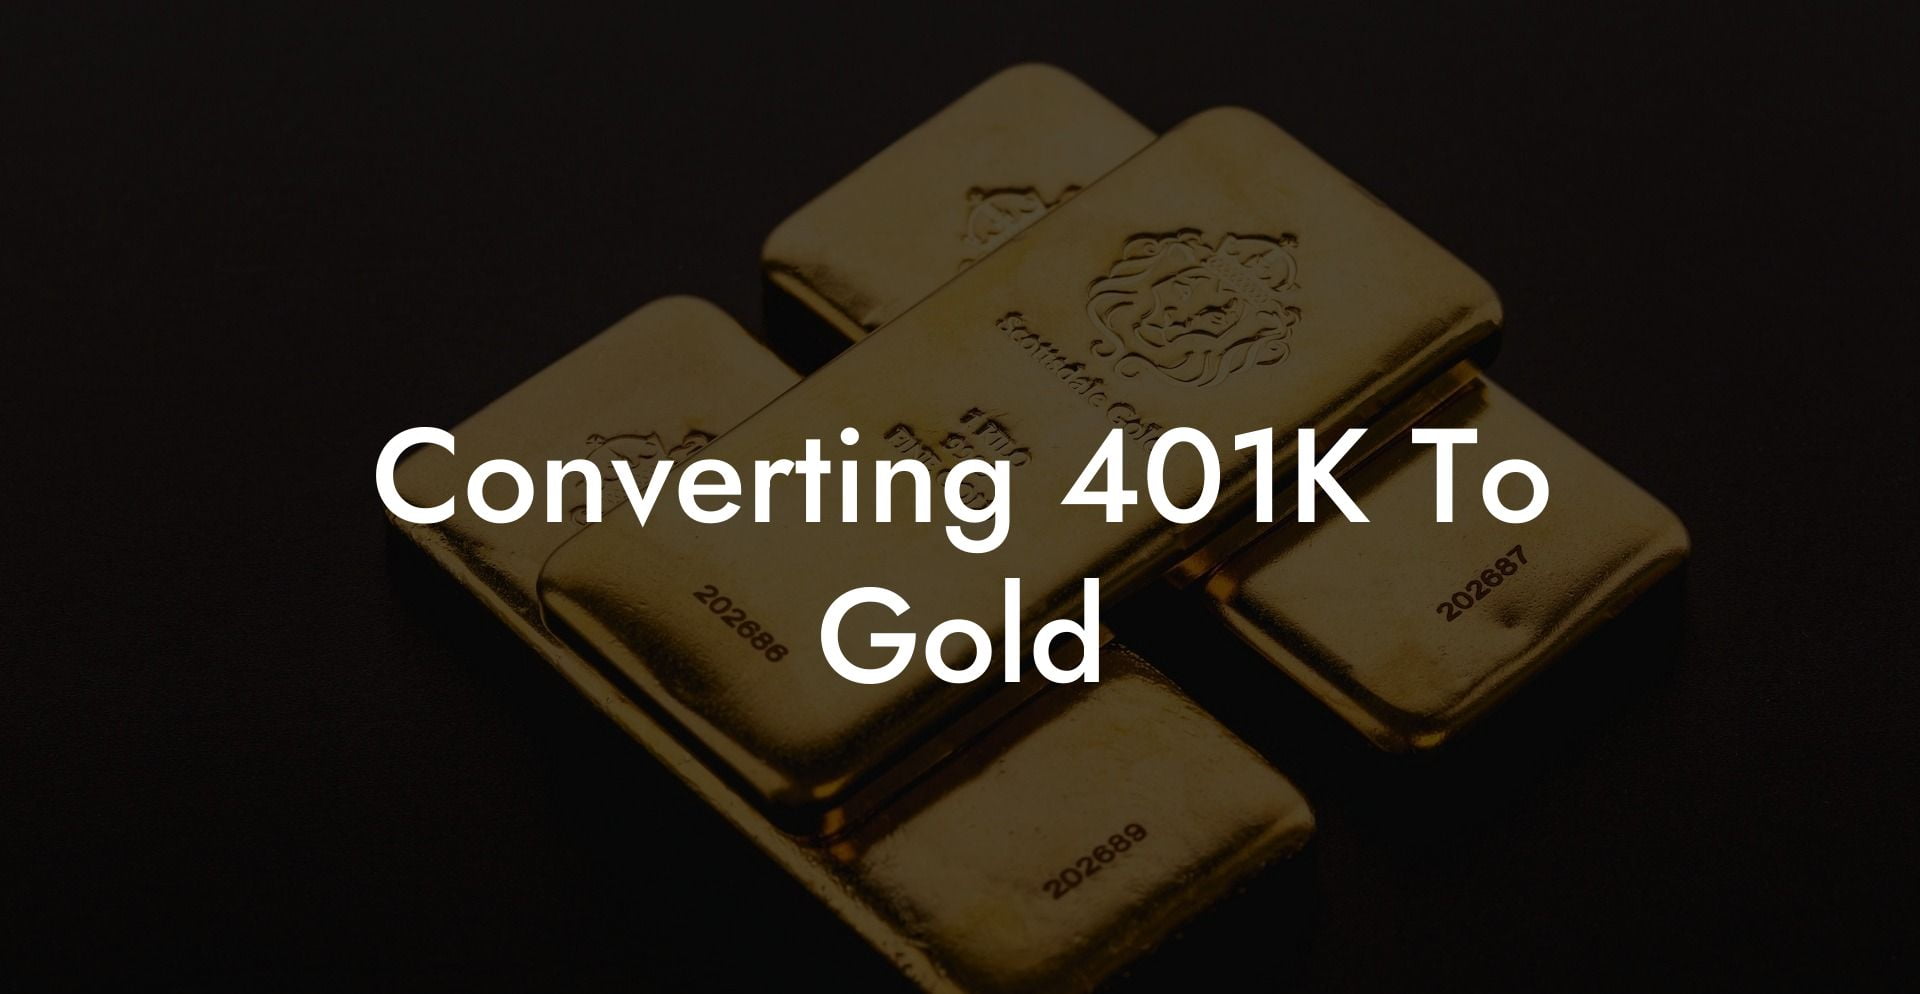 Converting 401K To Gold